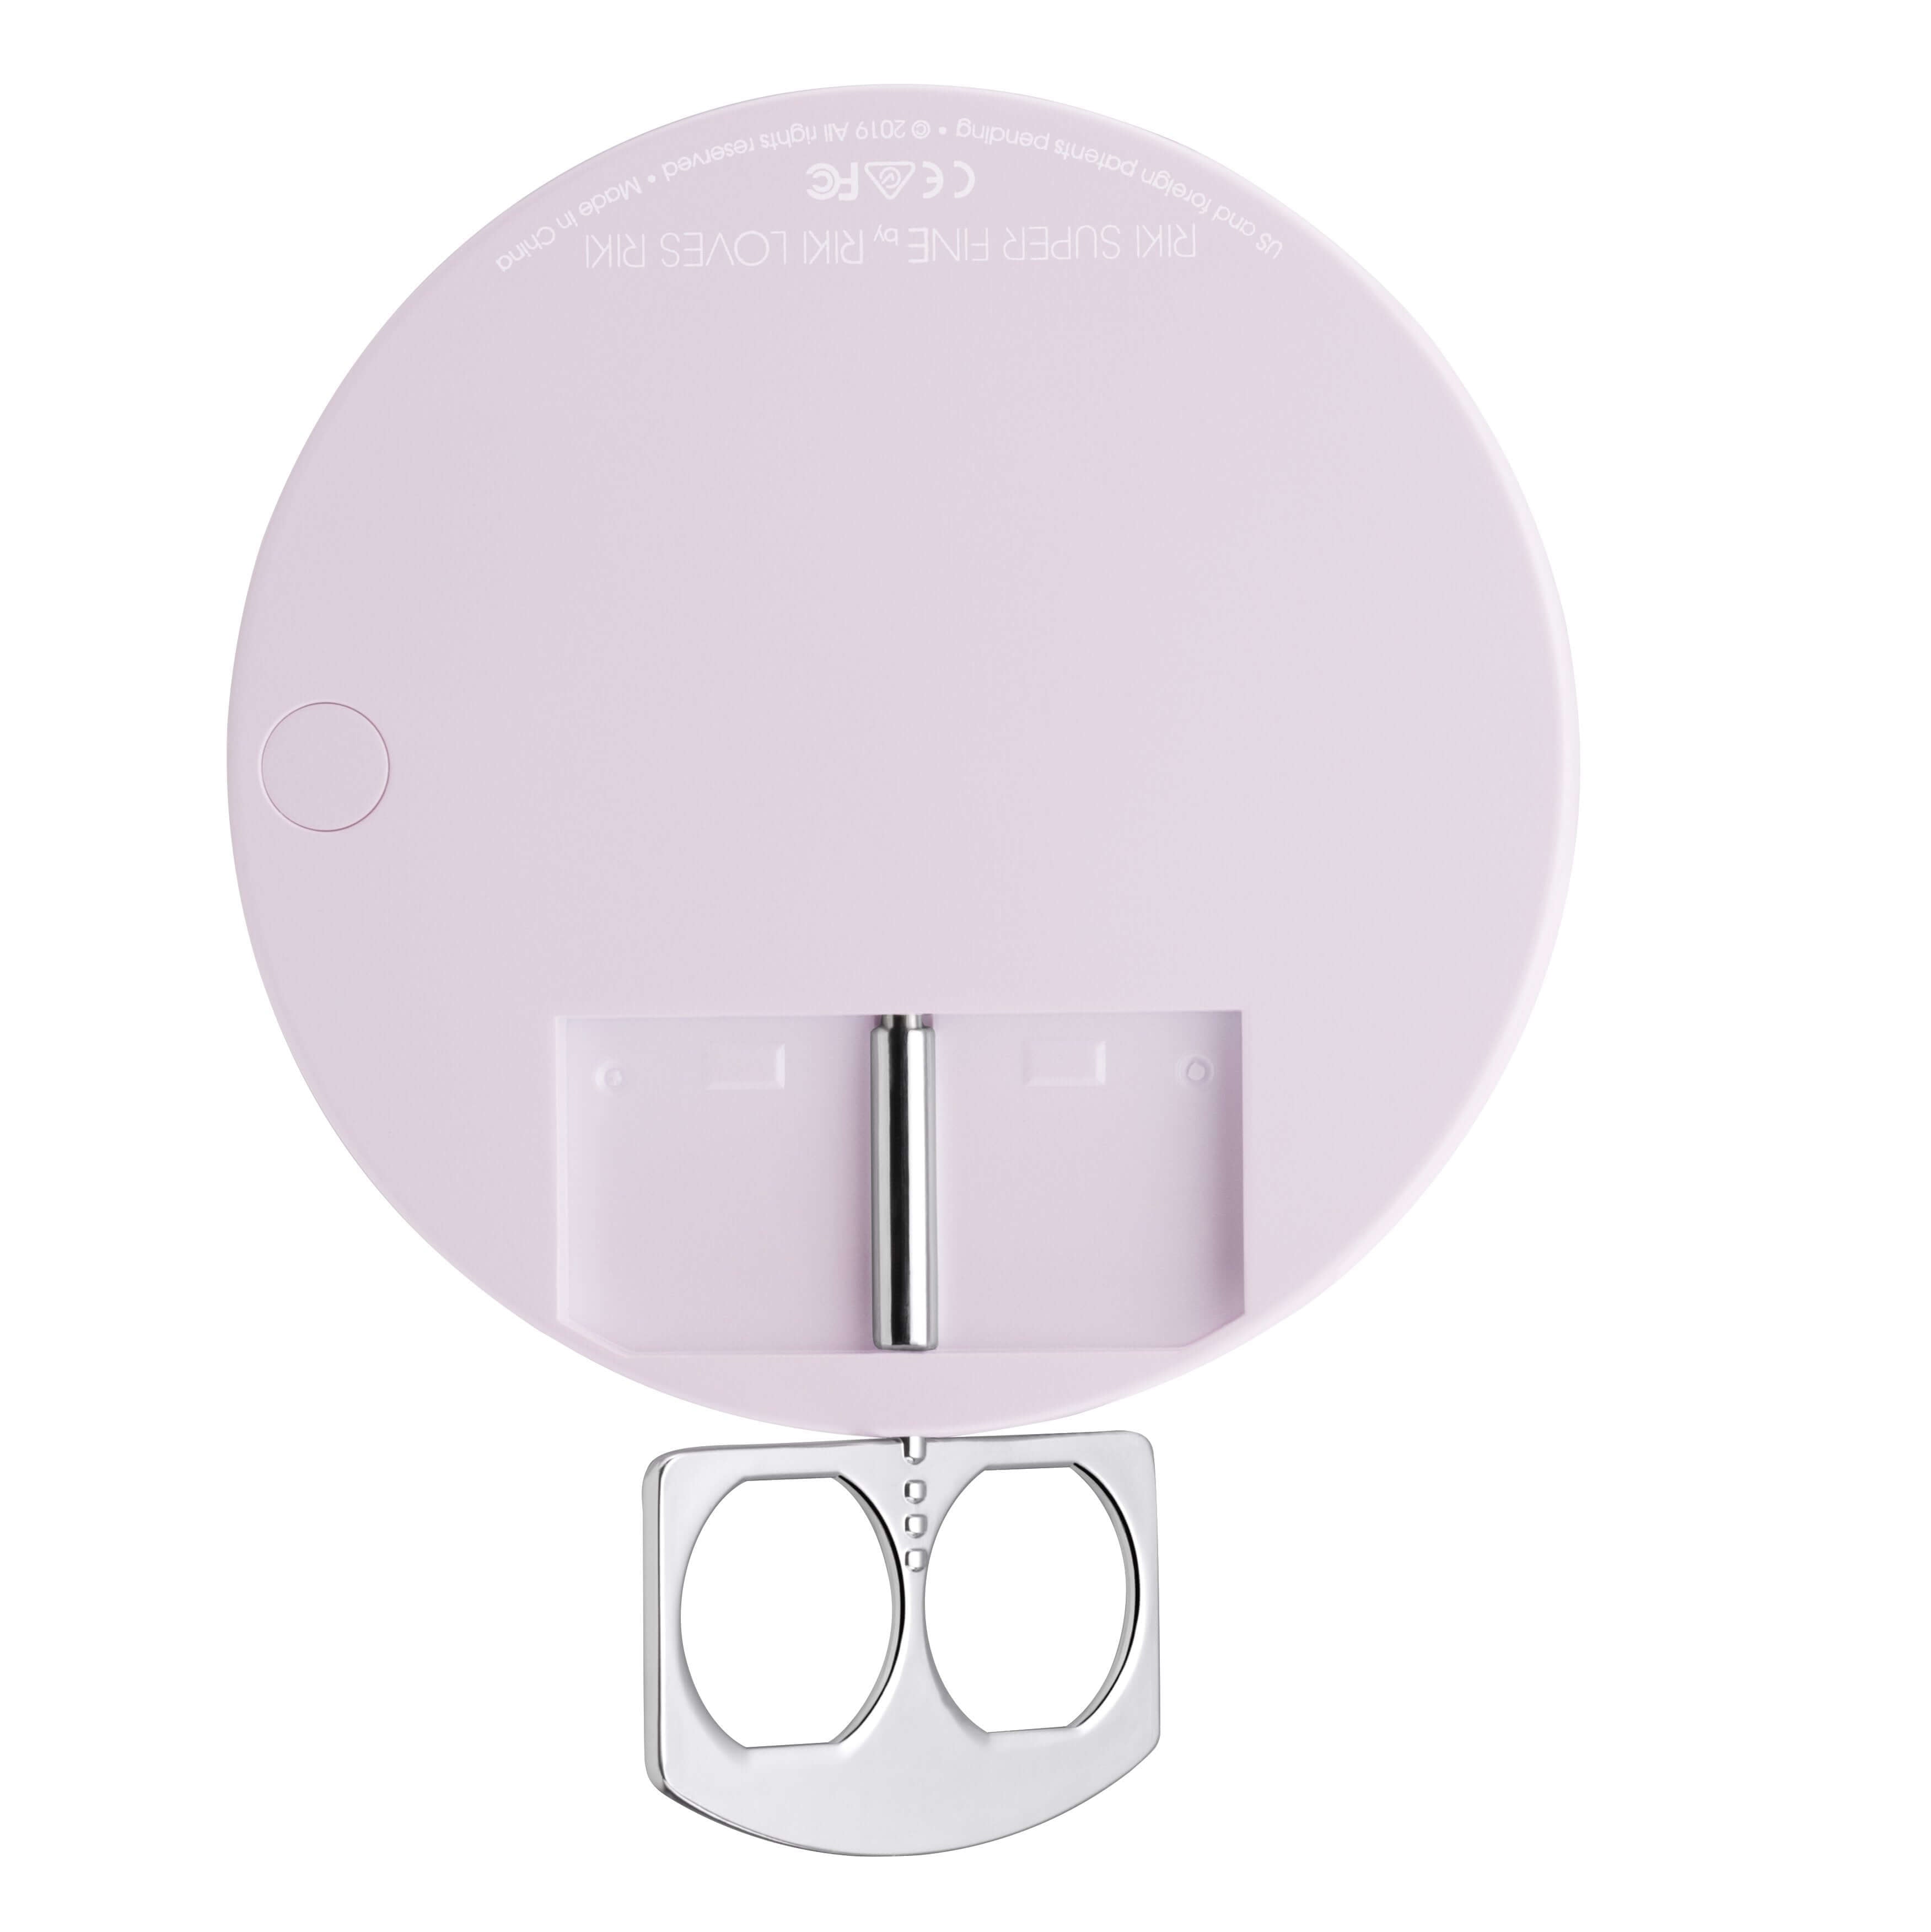 Master flawless makeup with the RIKI SUPER FINE 7x Hands-Free Makeup Mirror in Pink